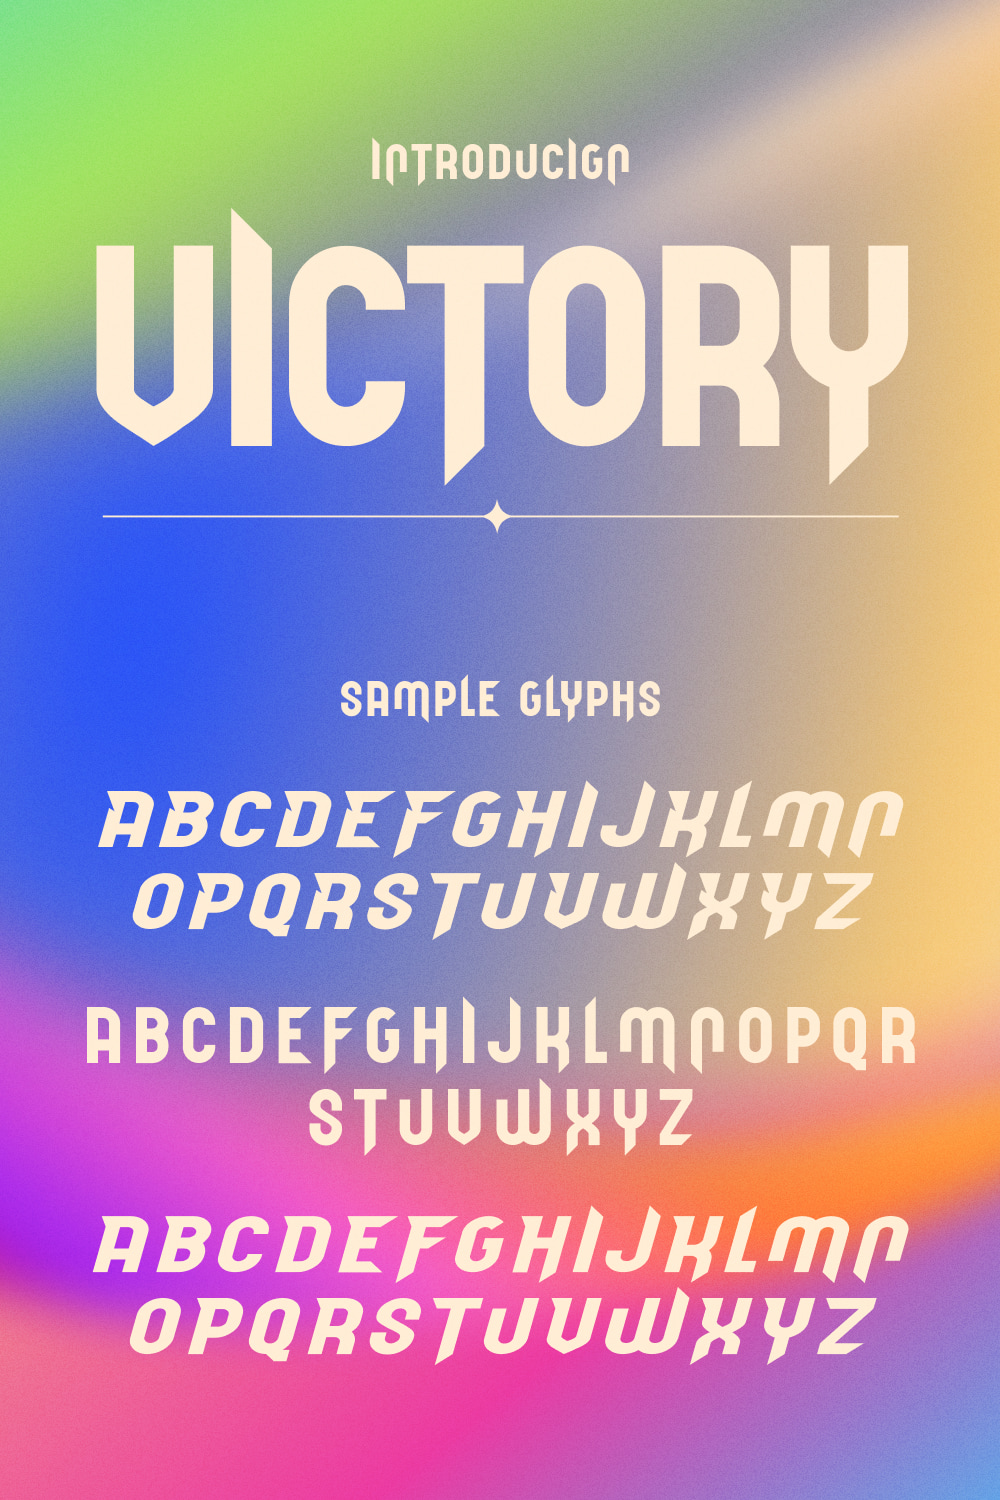 Victory font of pinterest.